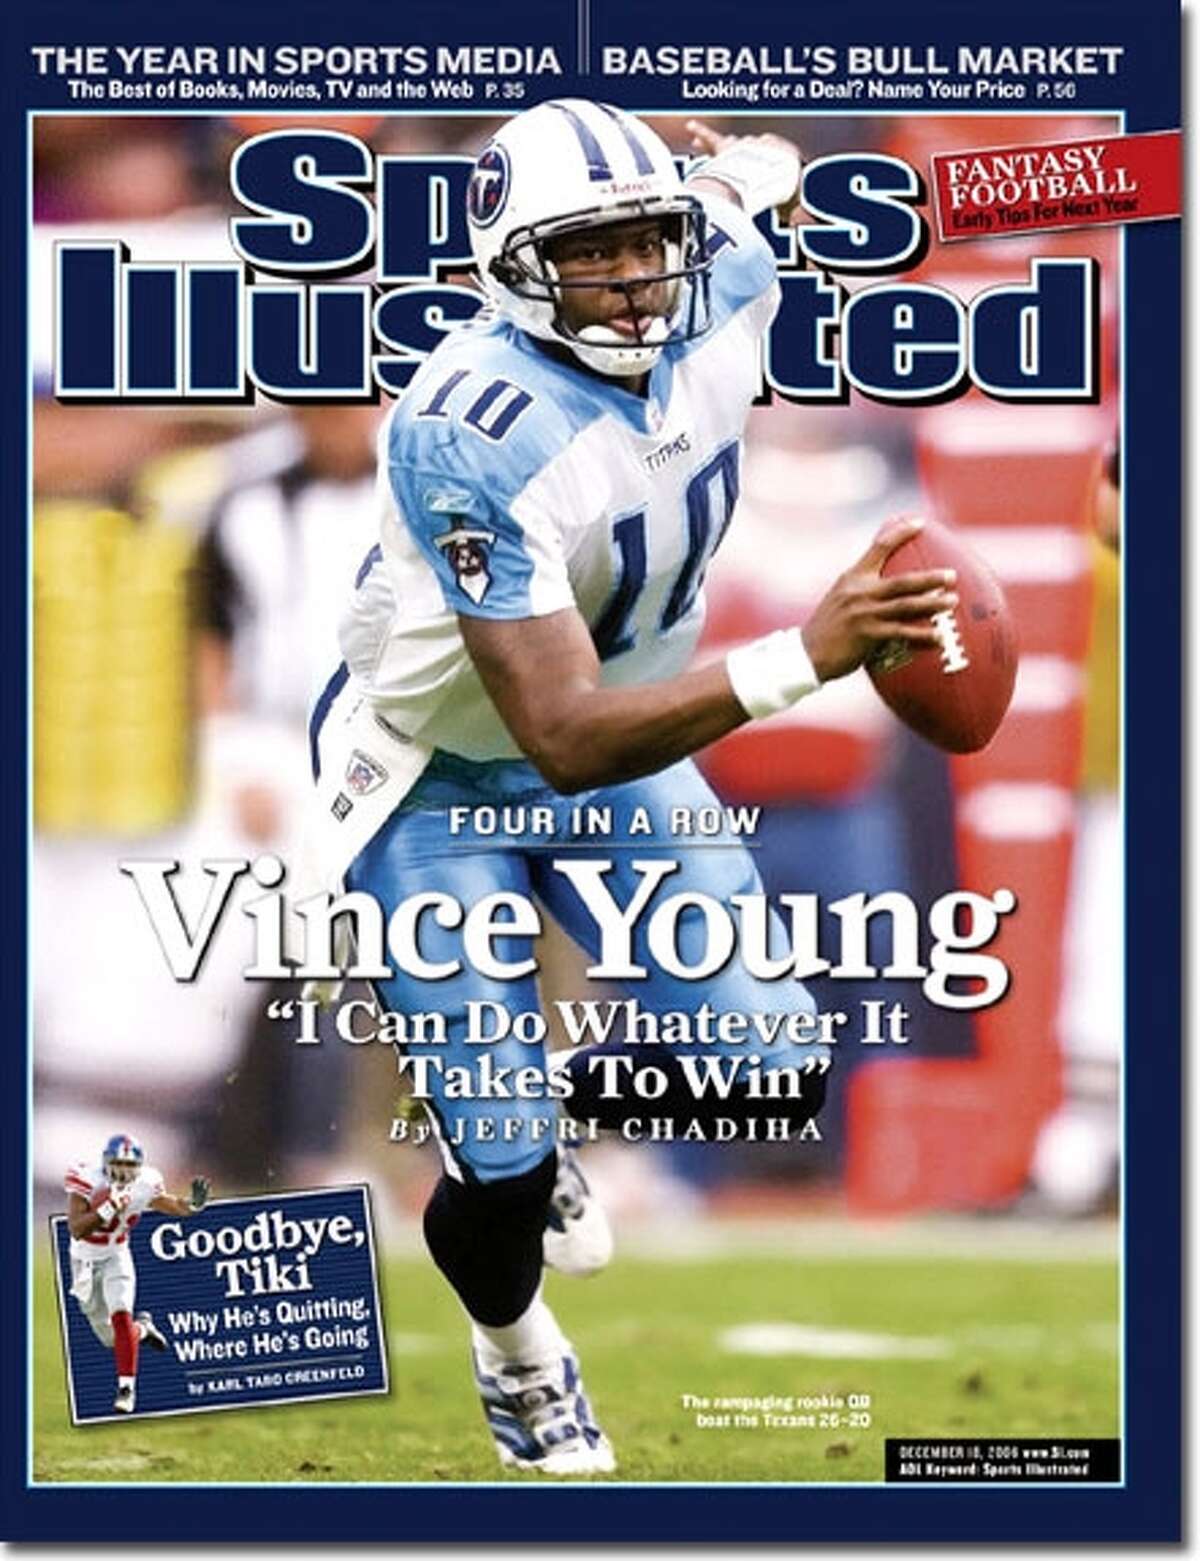 Vince Young on the cover of Sports Illustrated in 2006.